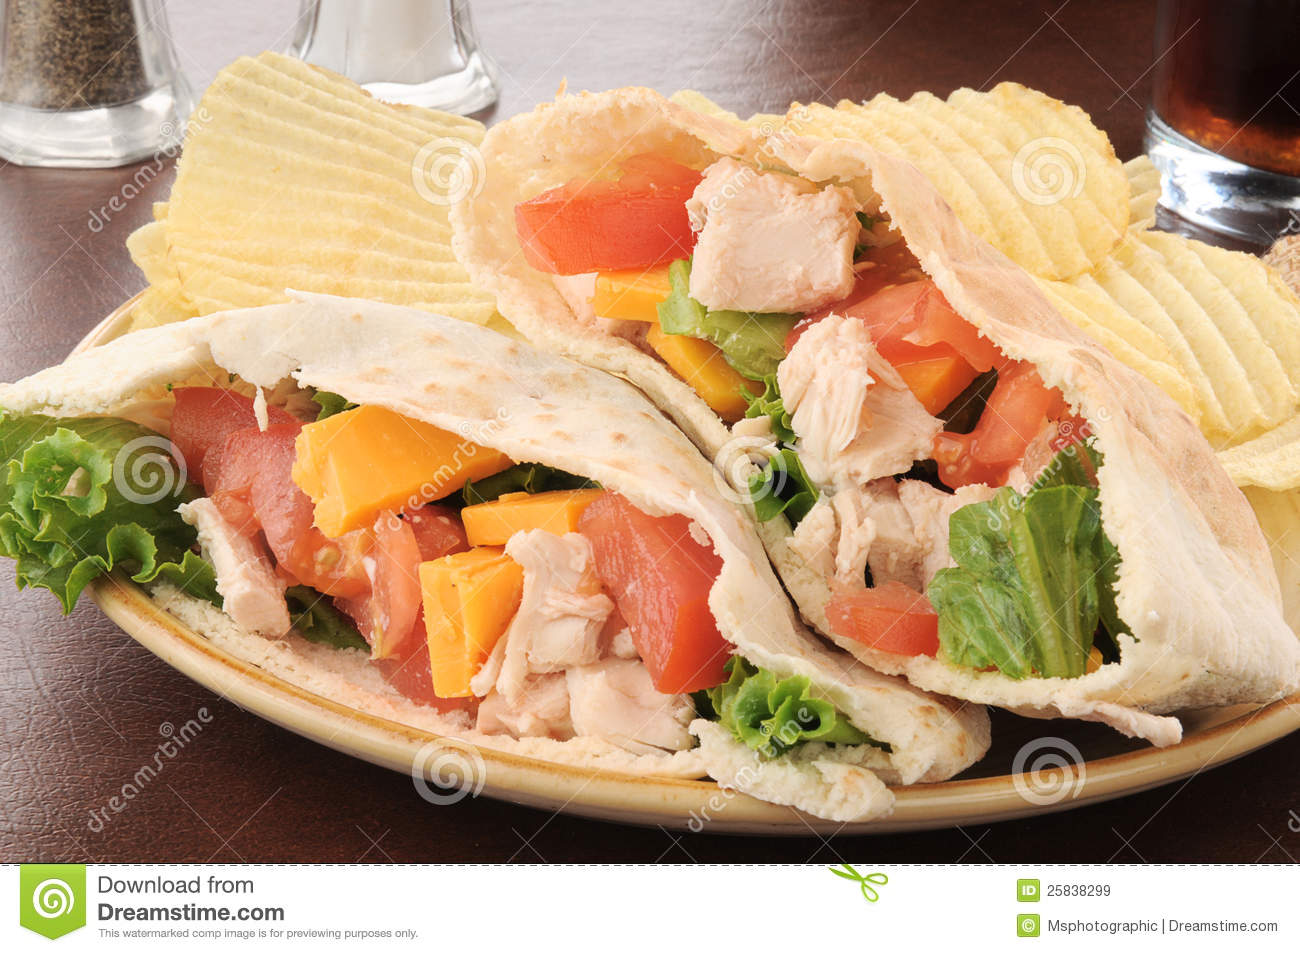 Chicken Pita Sandwich With Chips Royalty Free Stock Images   Image